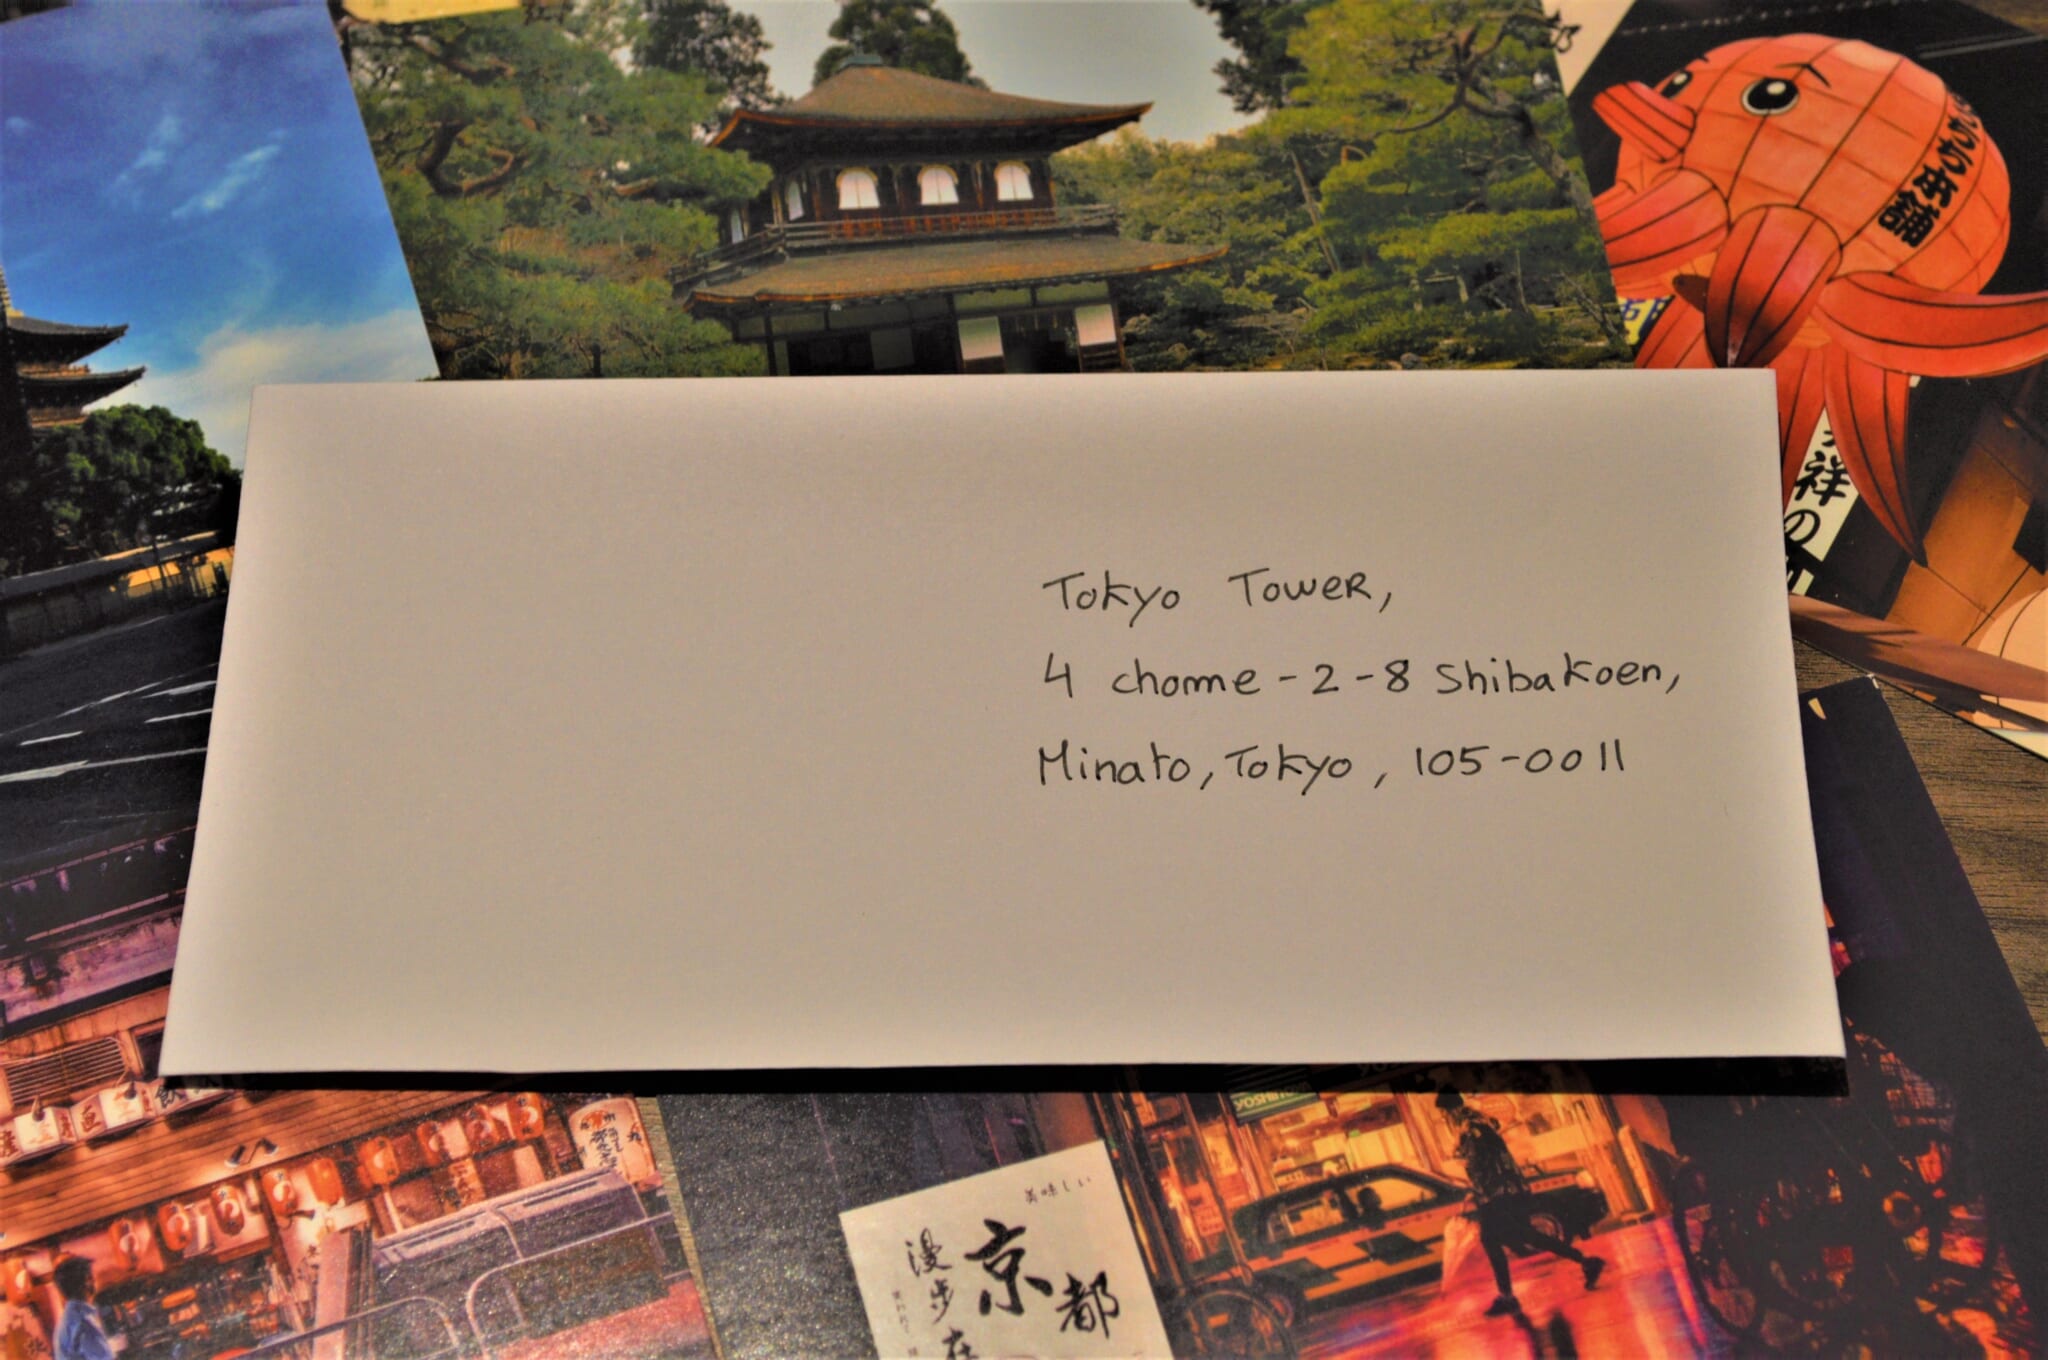 How to read & write a Japanese address on envelopes in Japan